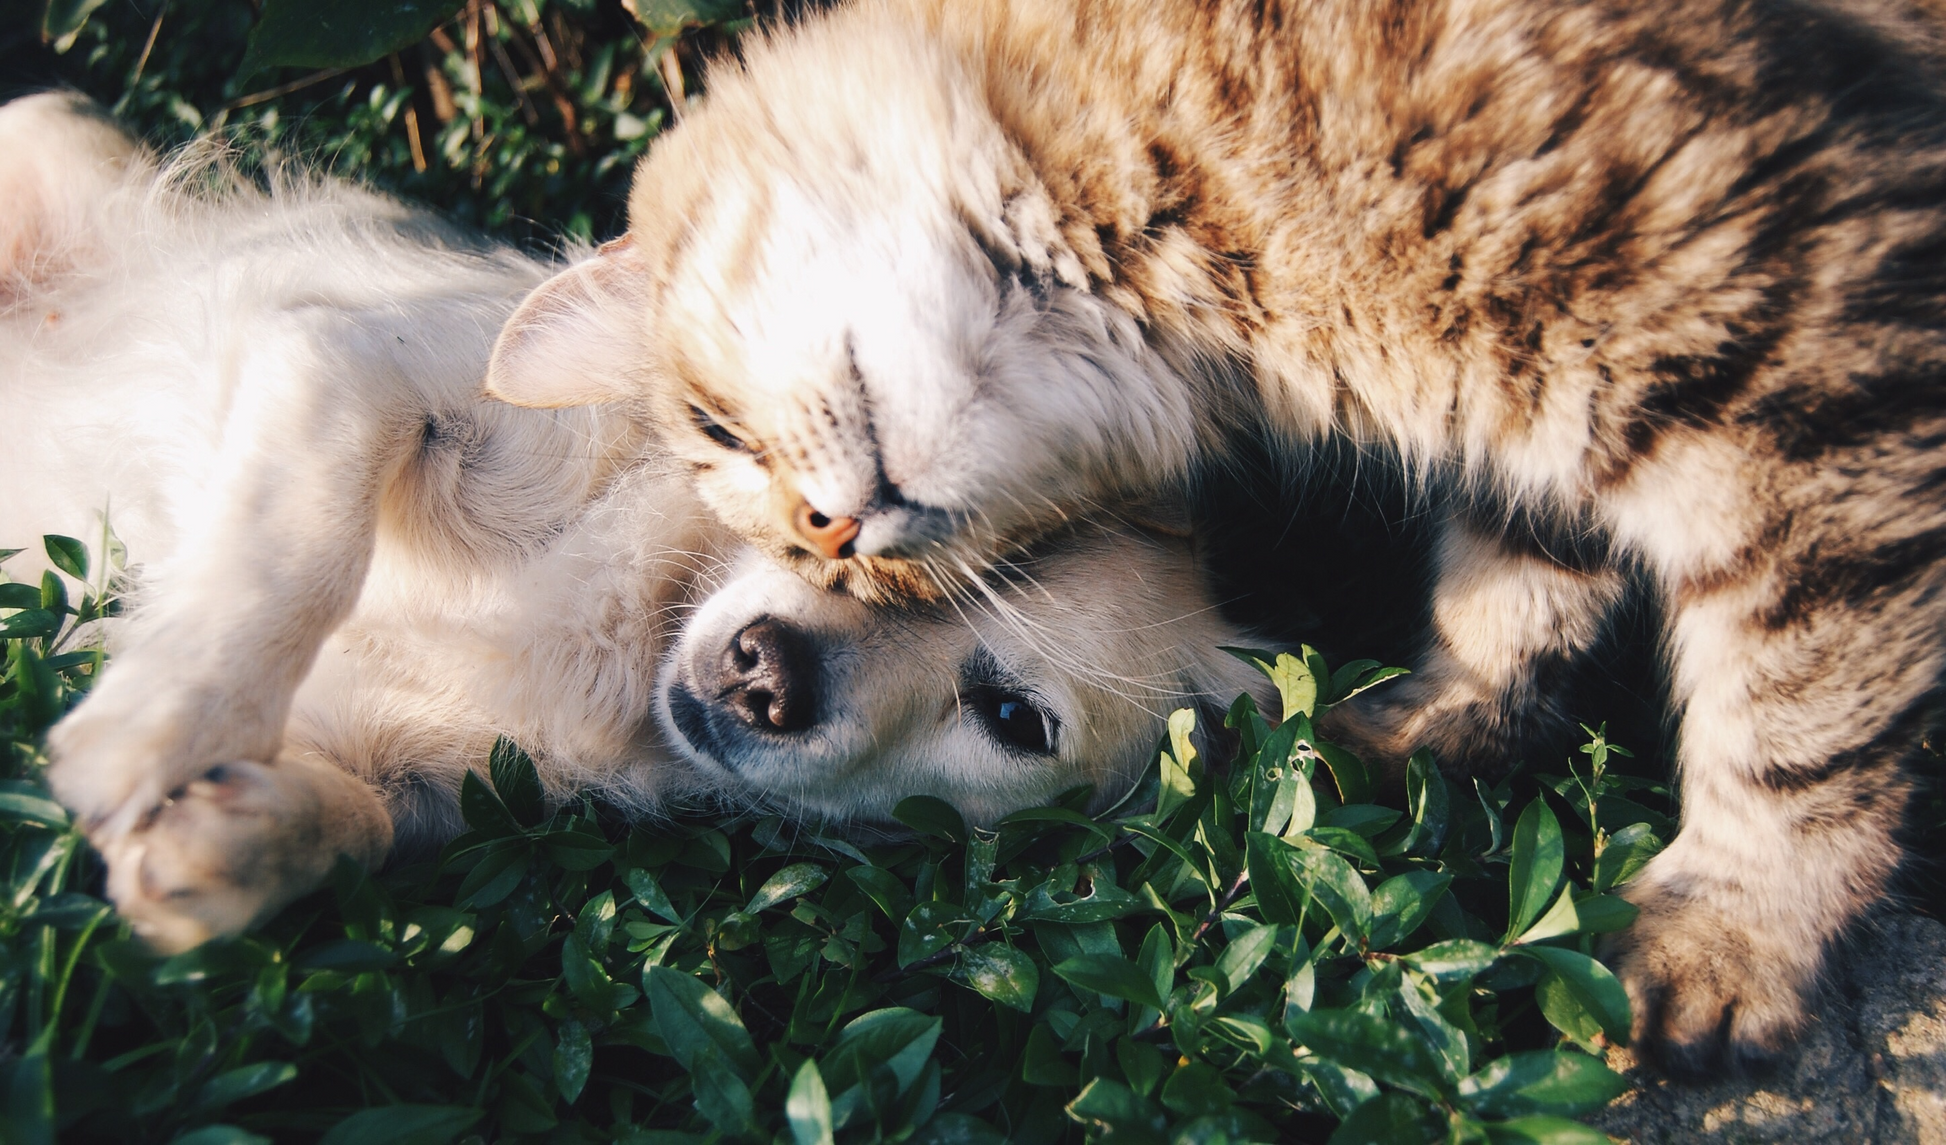 A dog and a cat snuggle on a leafy surface